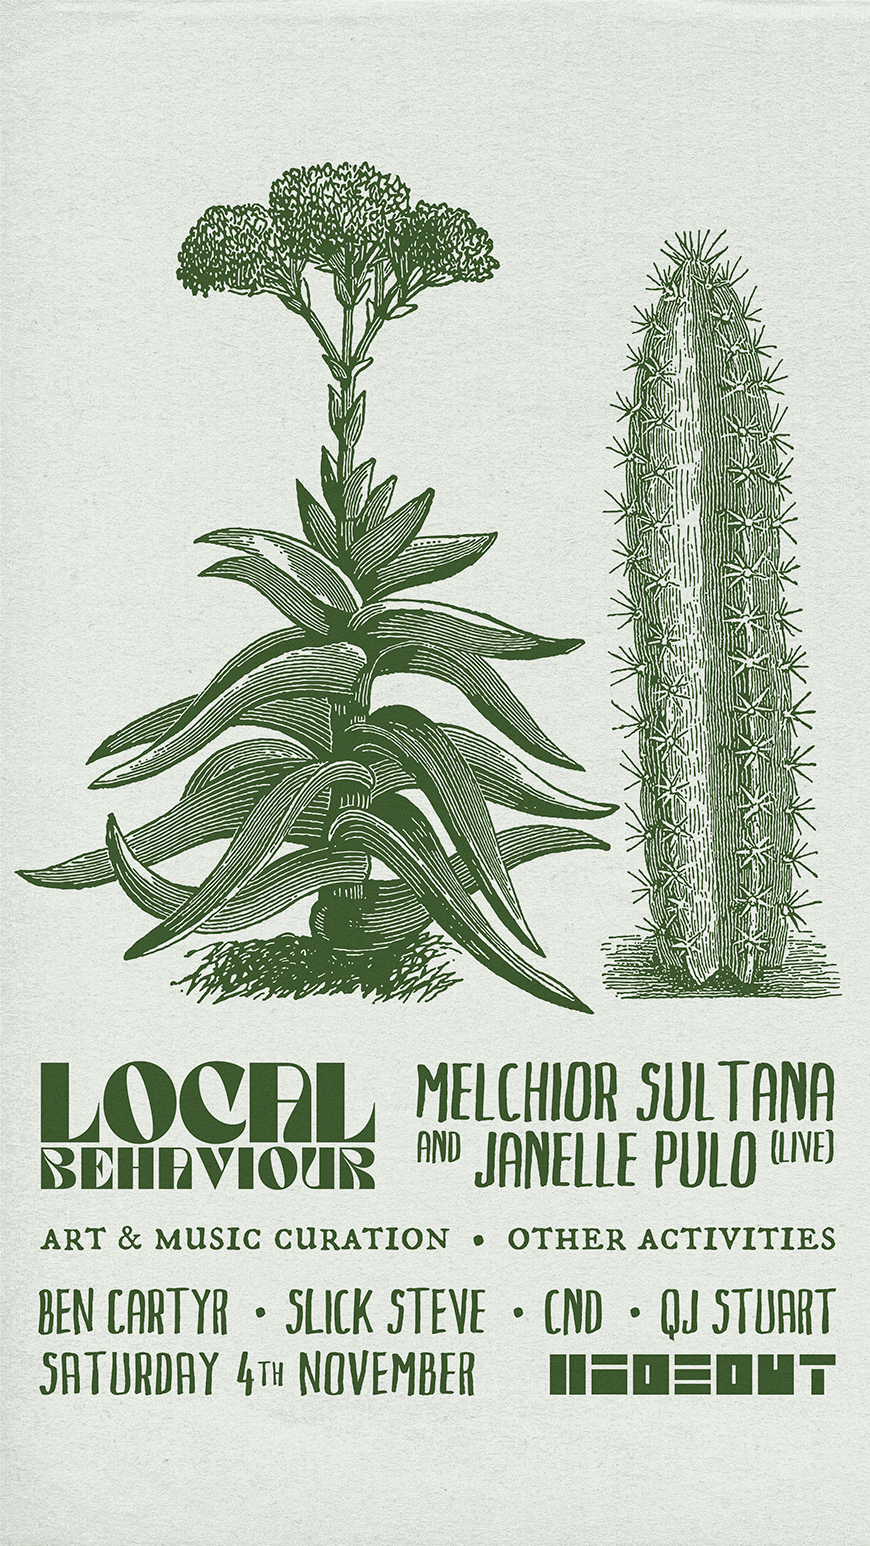 Local Behaviour ft. Melchior Sultana & Janelle Pulo (LIVE) poster